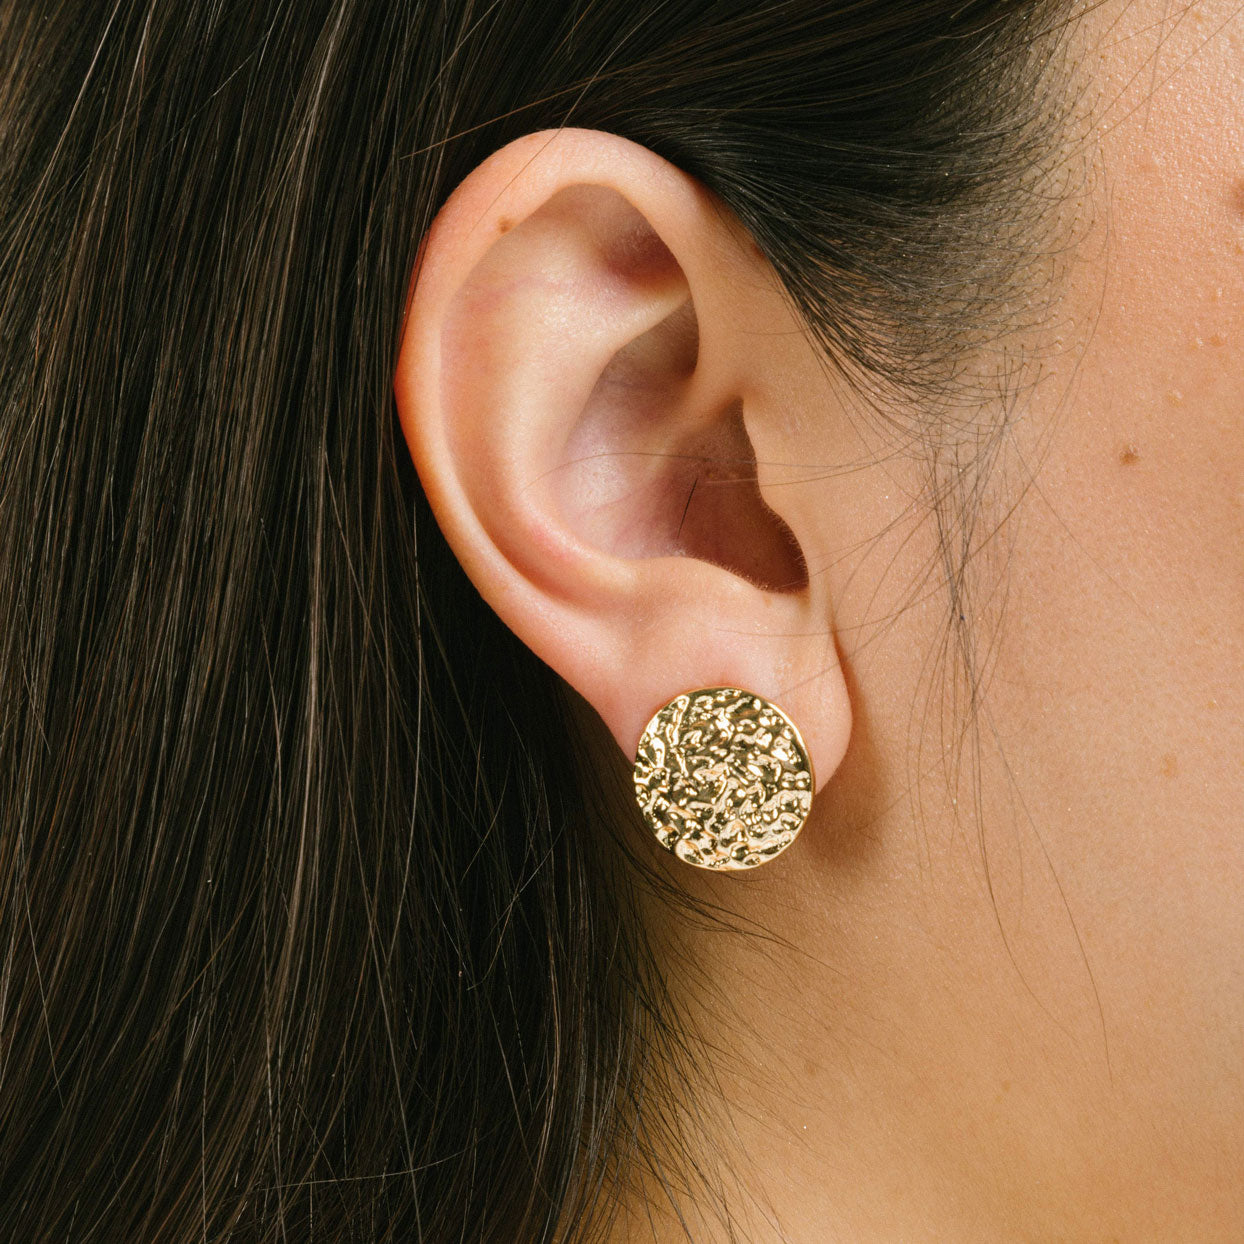 A model wearing the Paloma Clip-On Earrings in Gold provide a secure fit that is perfect for all ear types, including thick/large ears, sensitive ears, small/ thin ears, and stretched/healing ears. These earrings are crafted with a copper alloy and are free of lead and nickel. Their removable rubber padding ensures comfortable wear for up to 12 hours. This package contains one pair of earrings.